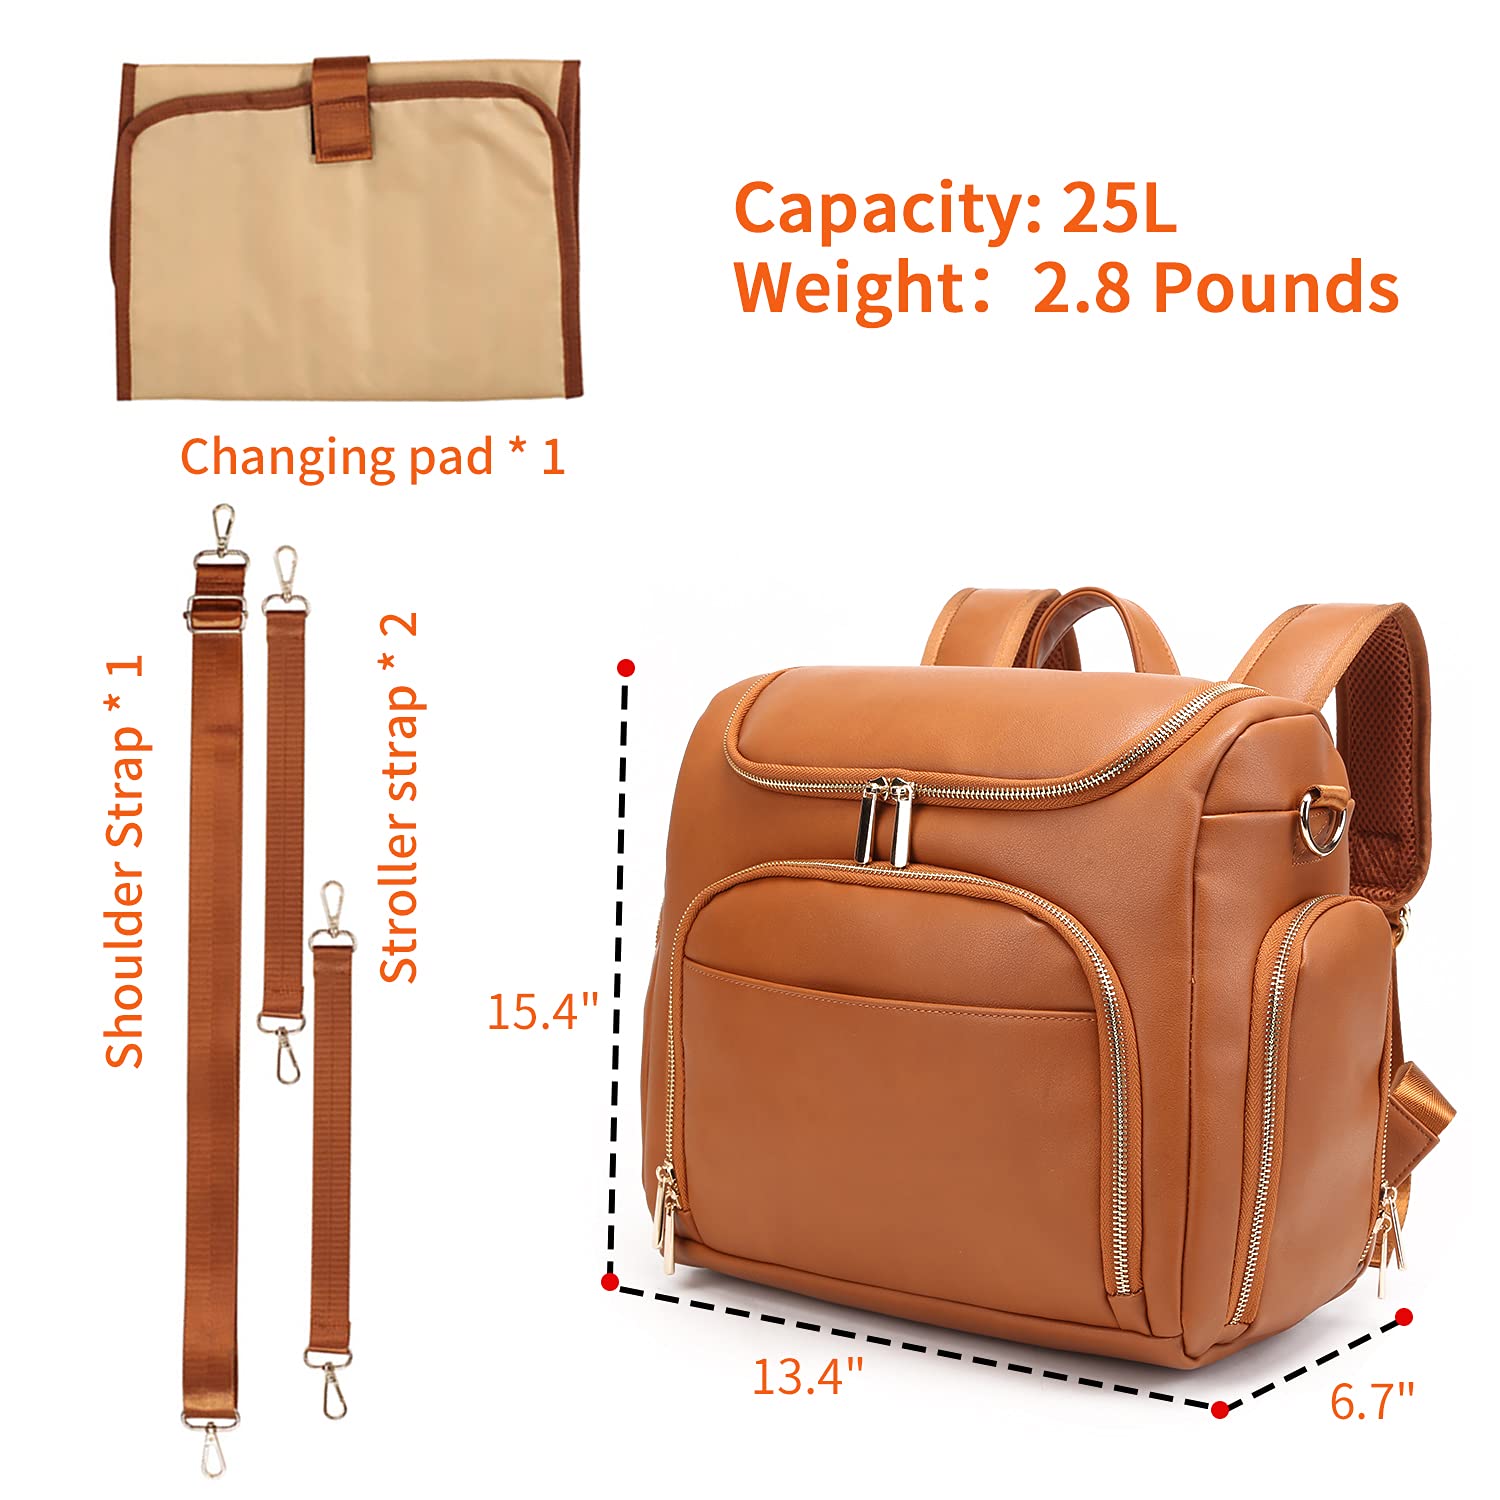 7-in-1 Baby Diaper Bag Solid PU Leather